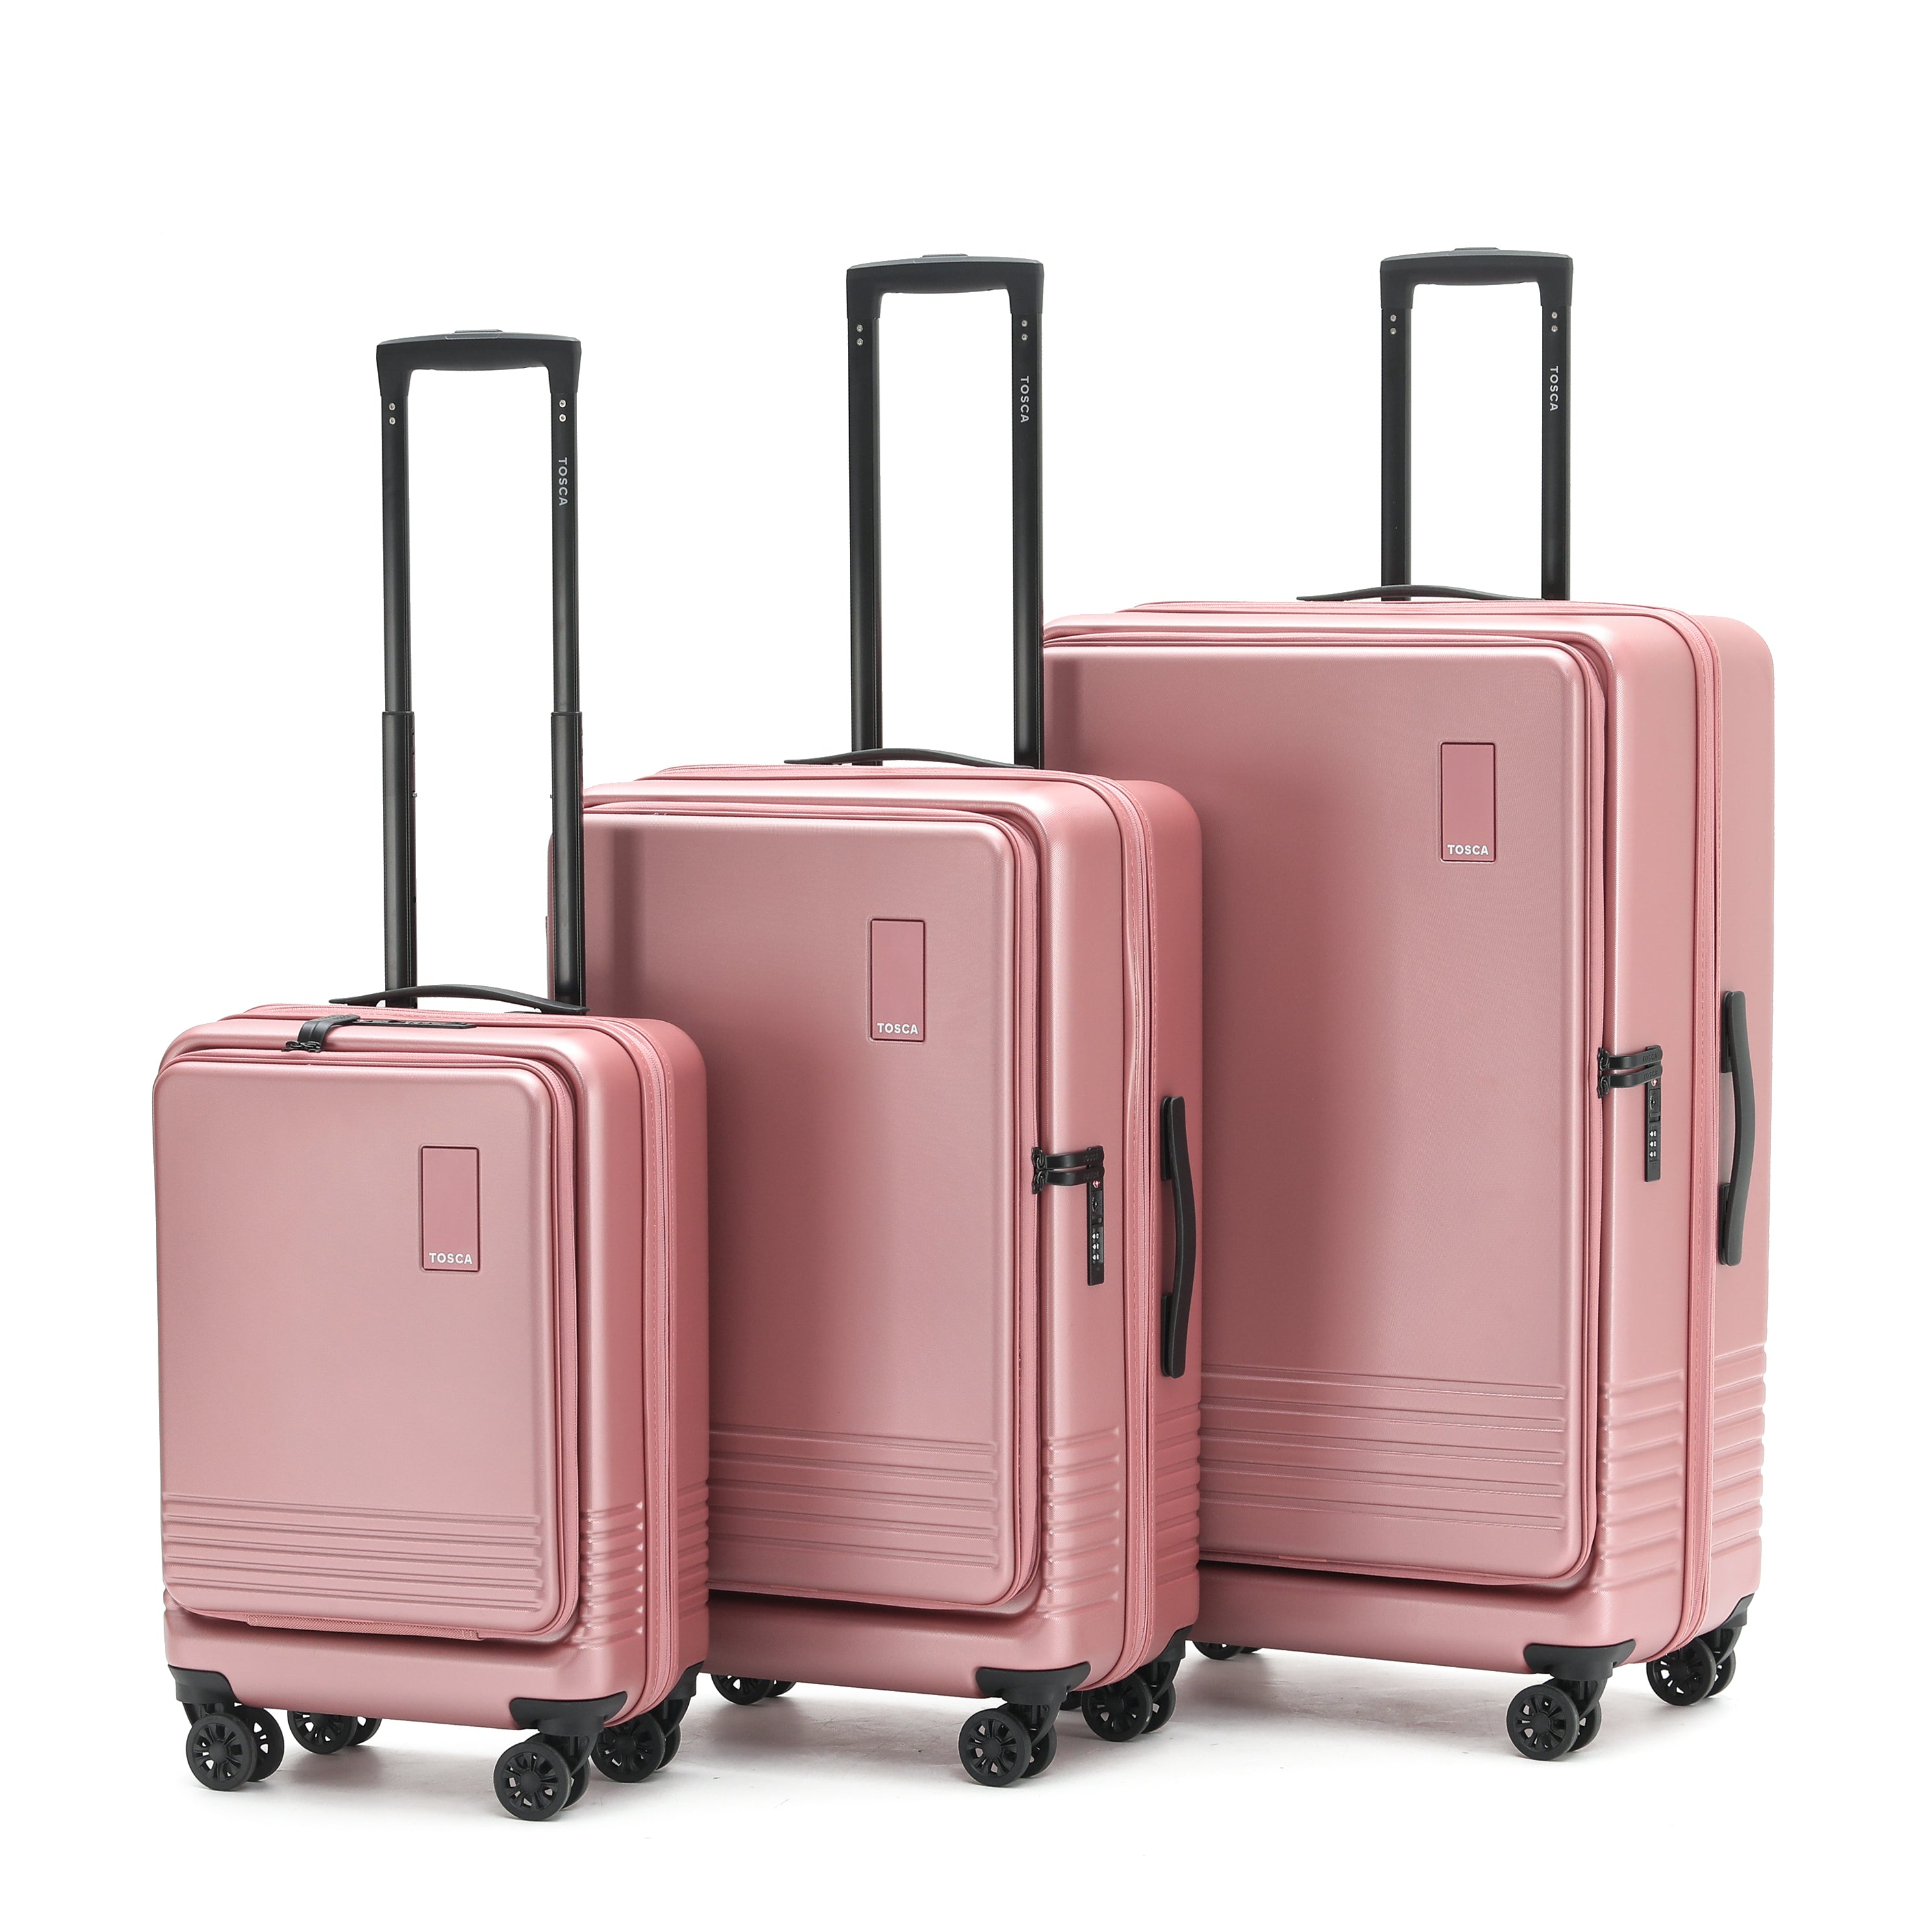 Tosca - TCA644 Horizon Front lid opening Set of 3 suitcases - Dusty Rose-2